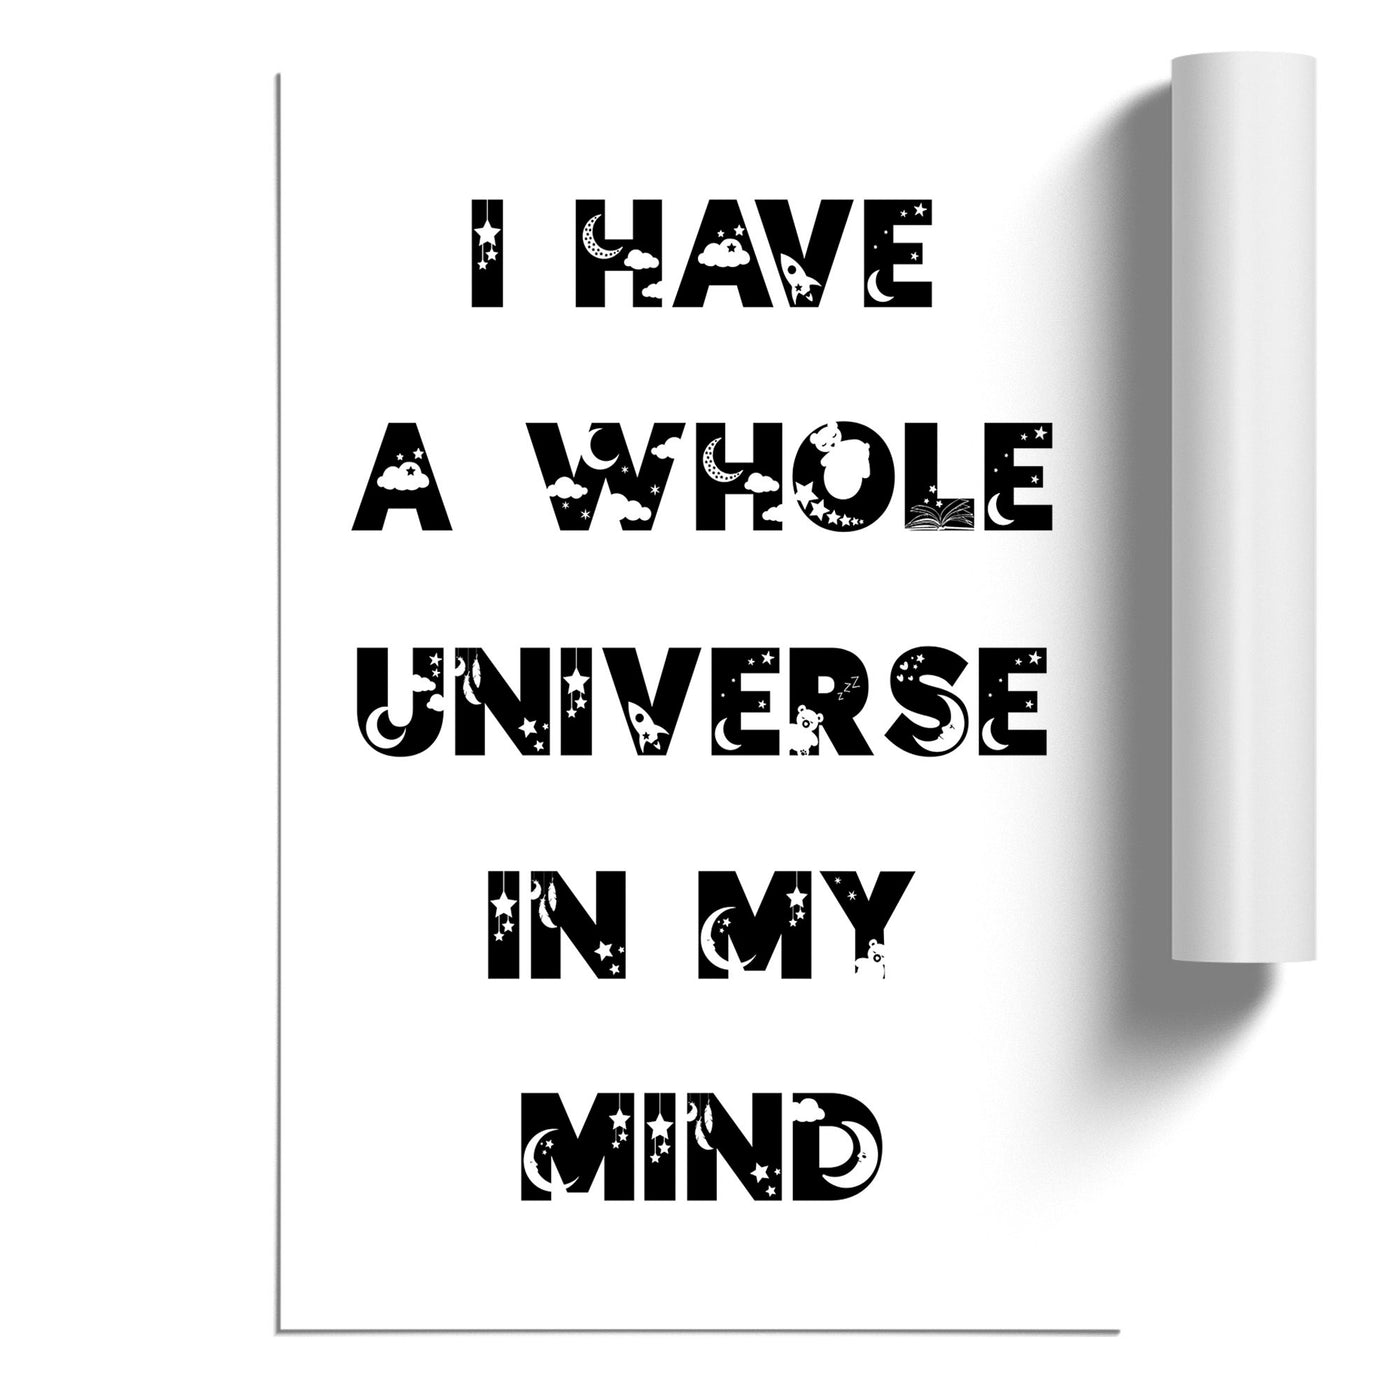 Universe in My Mind